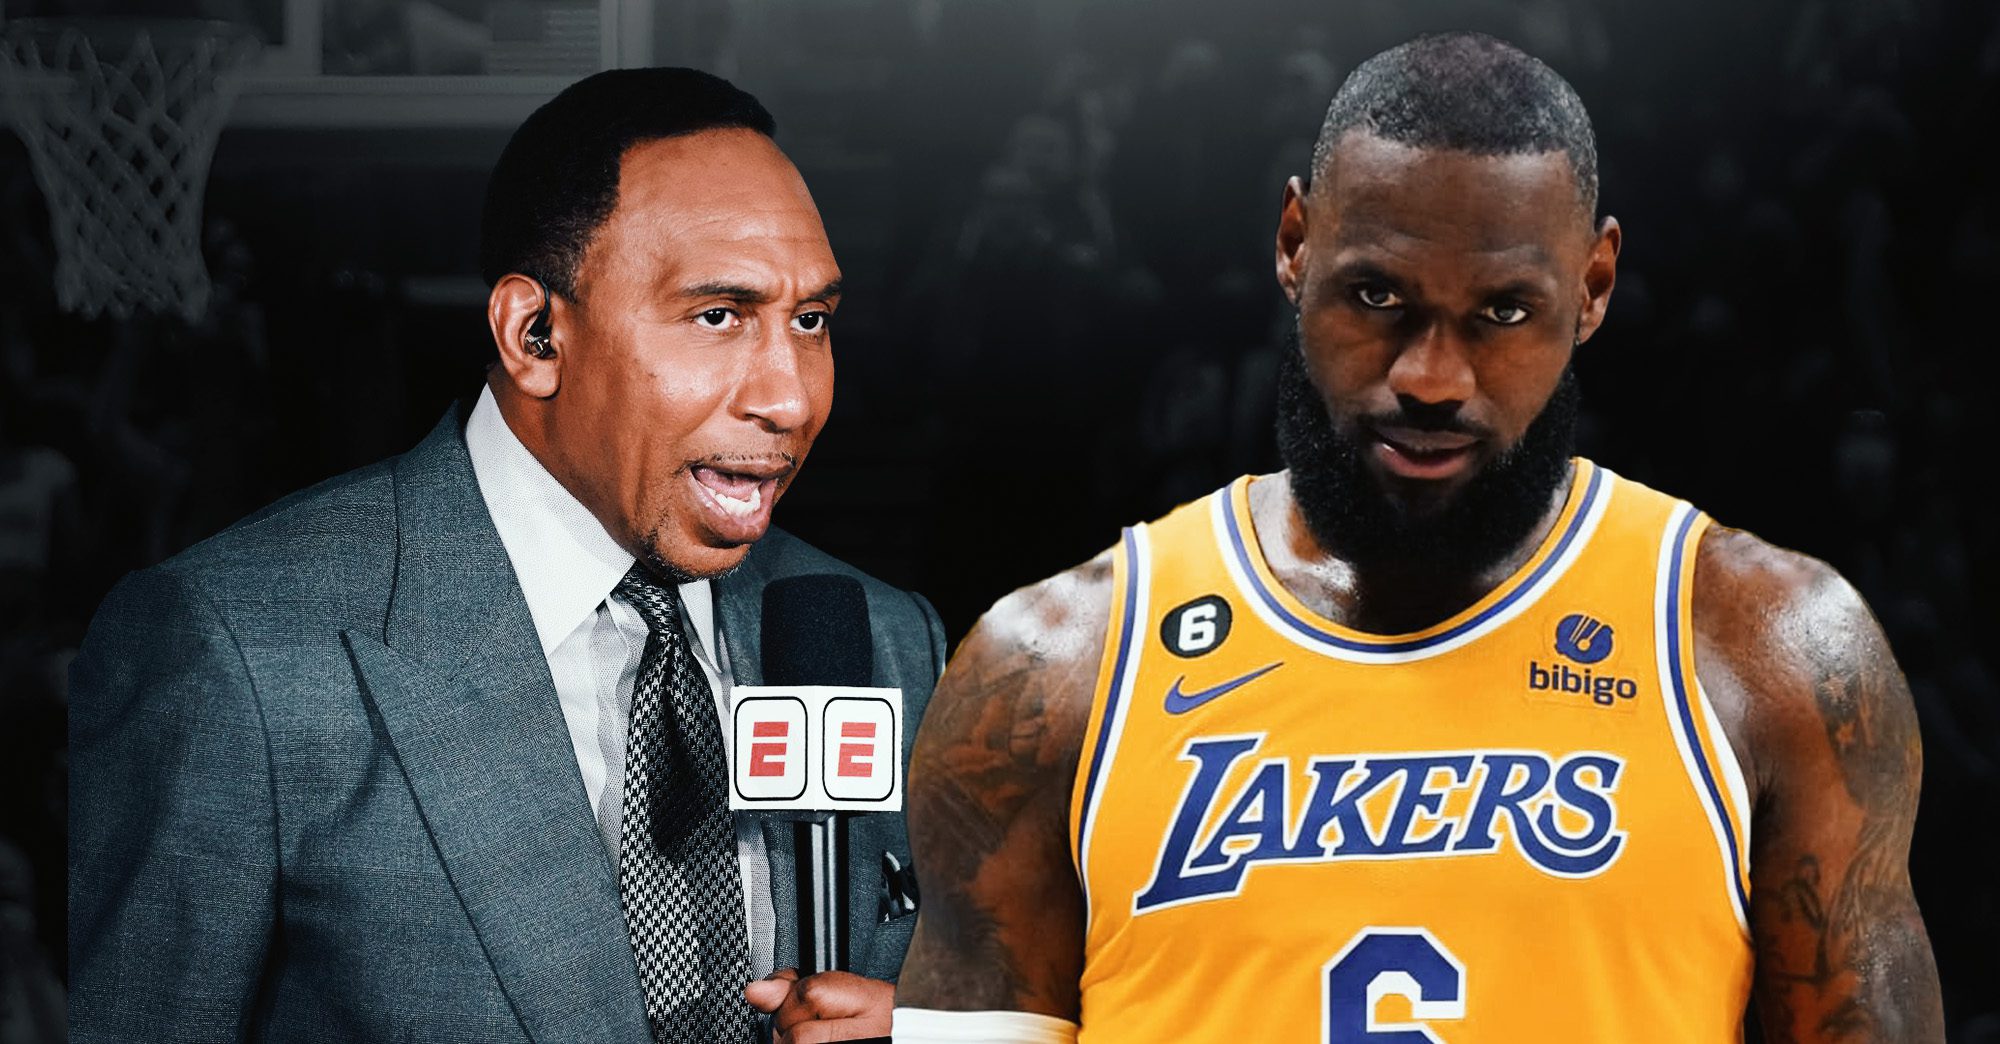 Stephen A. Smith Calls LeBron Out For “Lying”